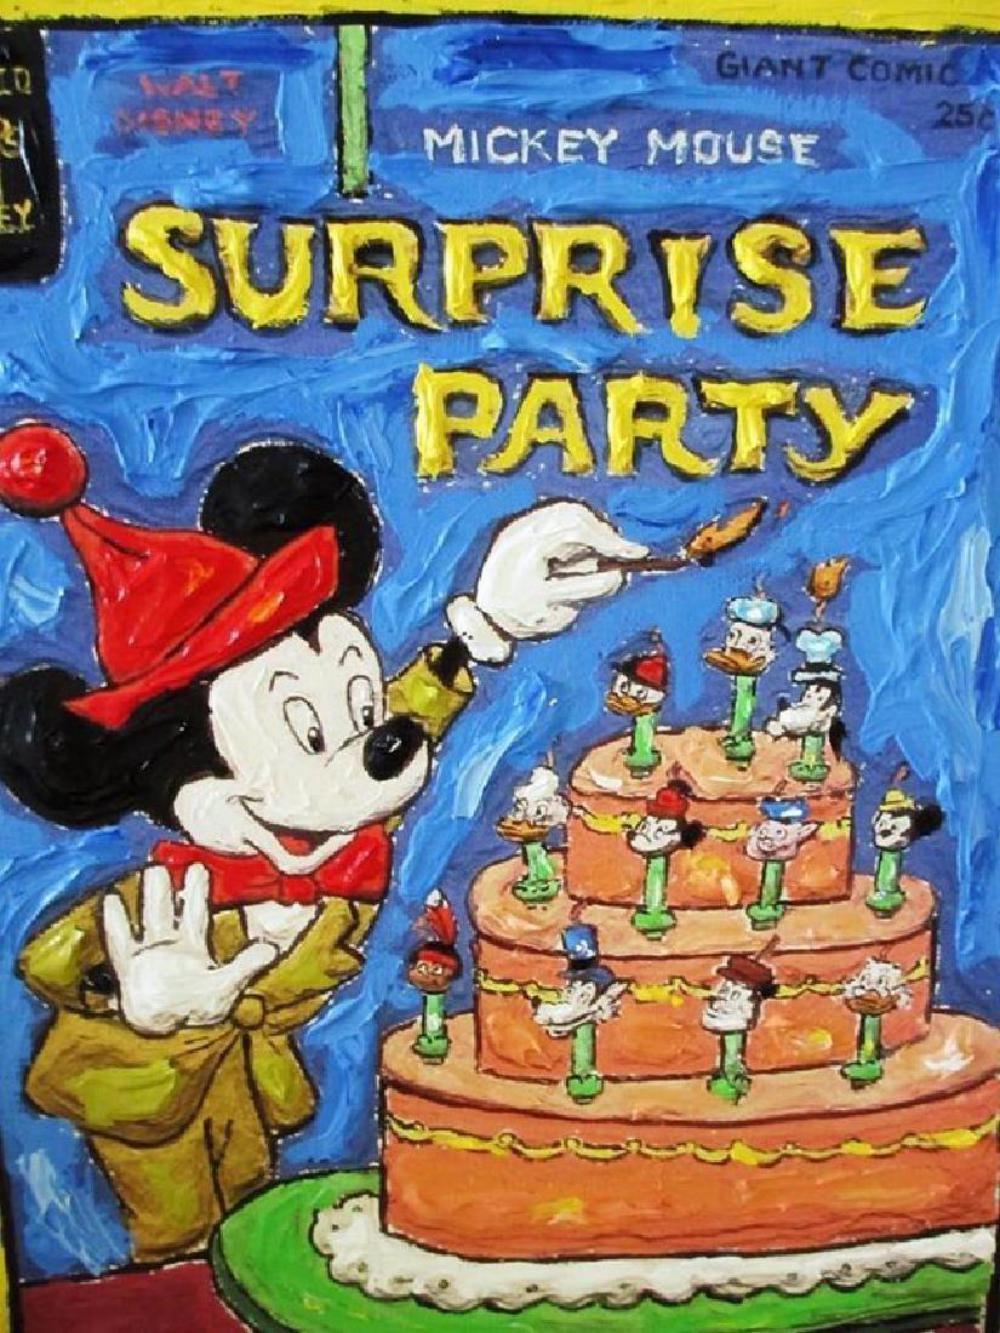 Leslie Lew "Birthday Mickey" Surprise Party Sculpted